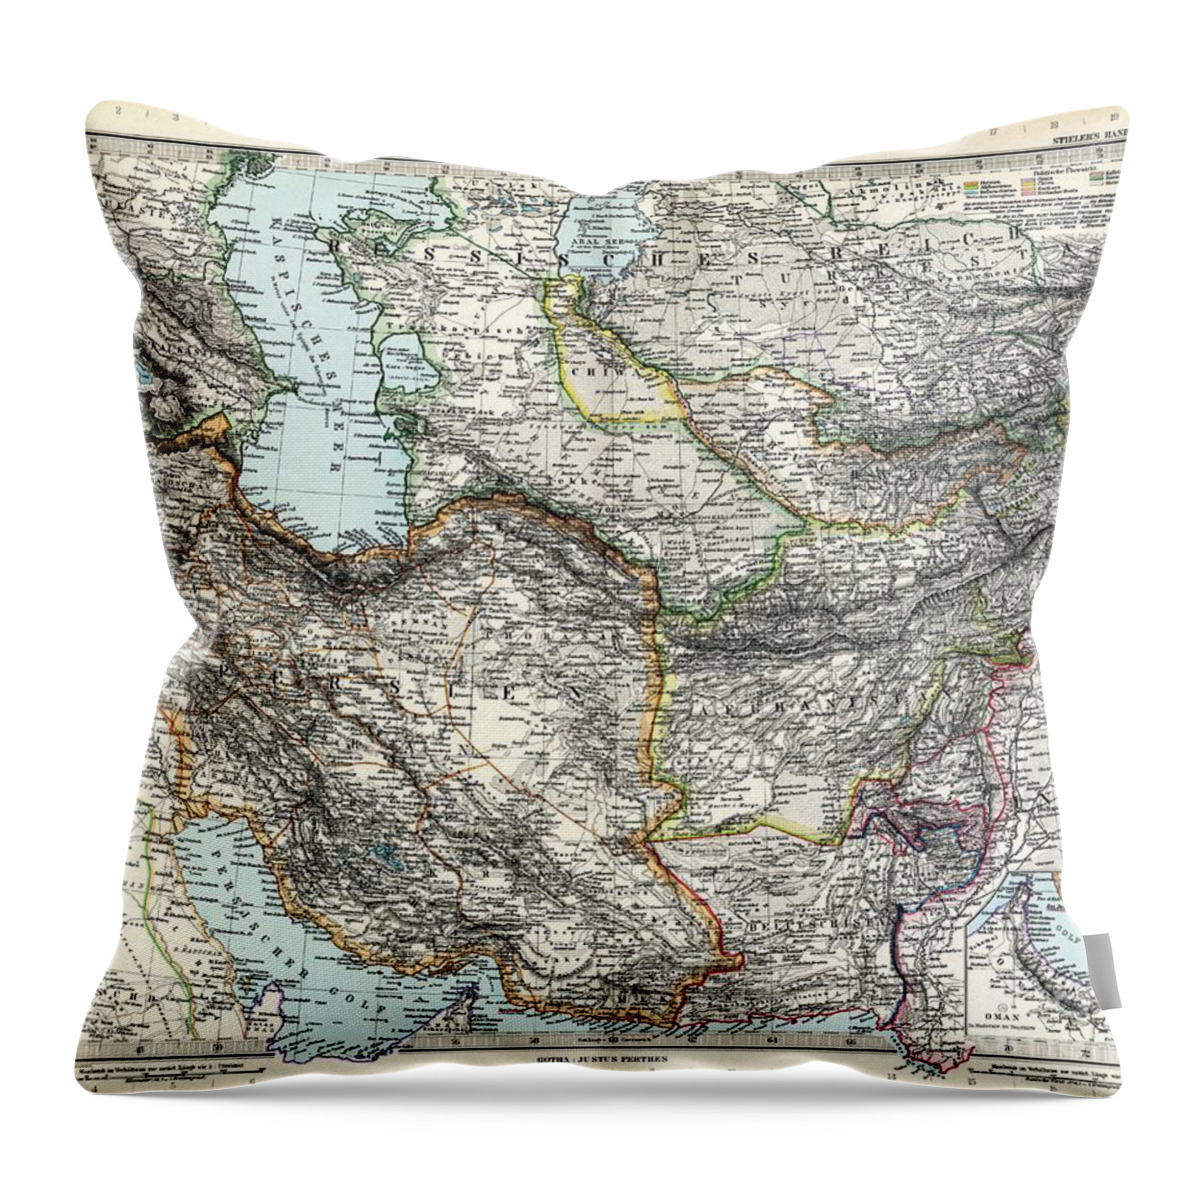 Map Of Iran And Turan In Qajar Dynasty Drawn By Adolf Stieler - 1891 Throw Pillow featuring the painting Map of Iran and Turan in Qajar dynasty drawn by Adolf Stieler by Celestial Images